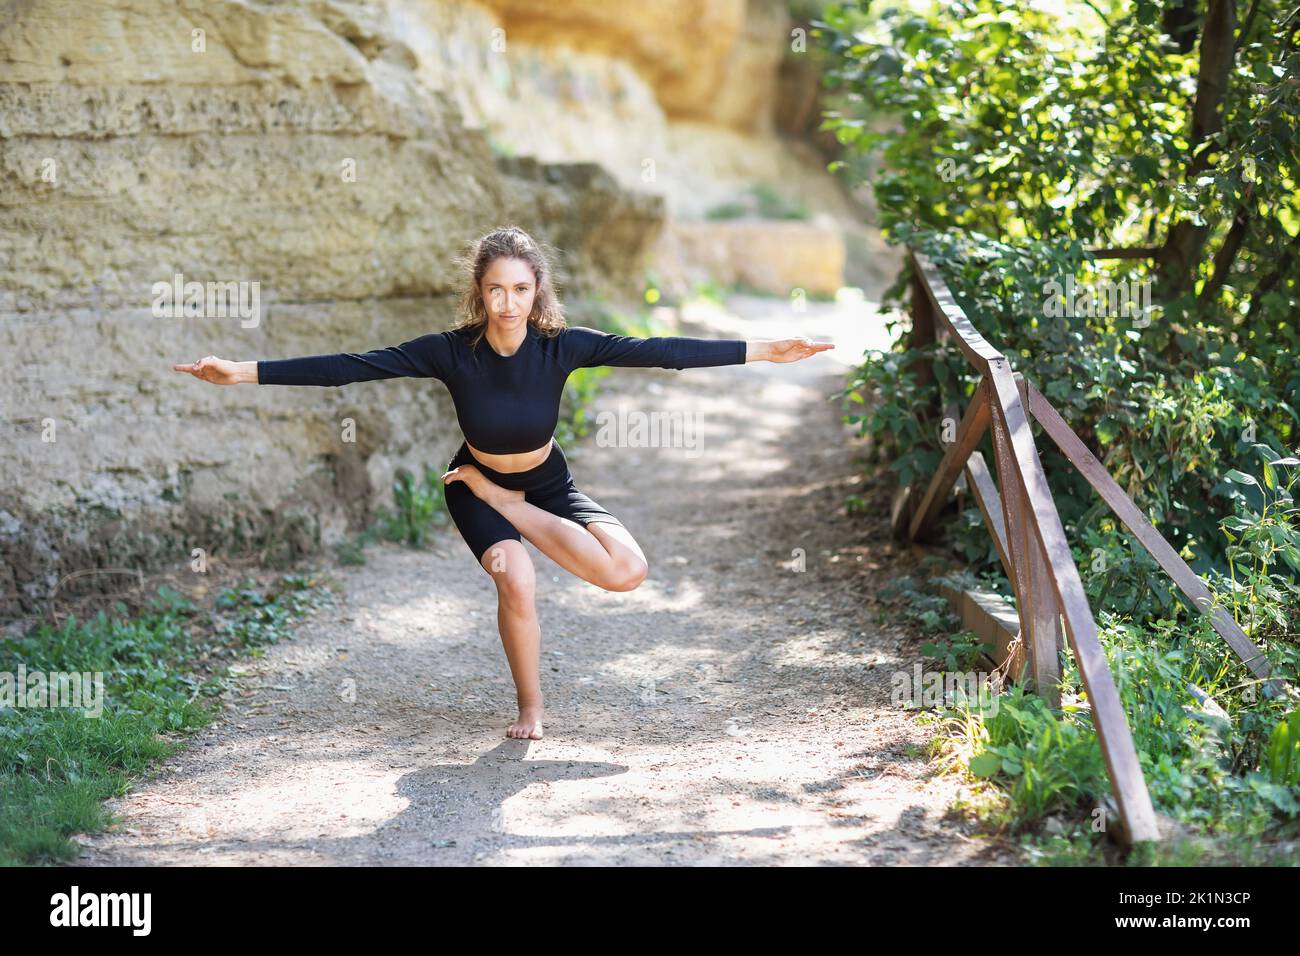 A woman in black sportswear practising yoga performs a variation of a vrikshasana exercise, a tree pose, trains in the park on a warm summer morning, Stock Photo